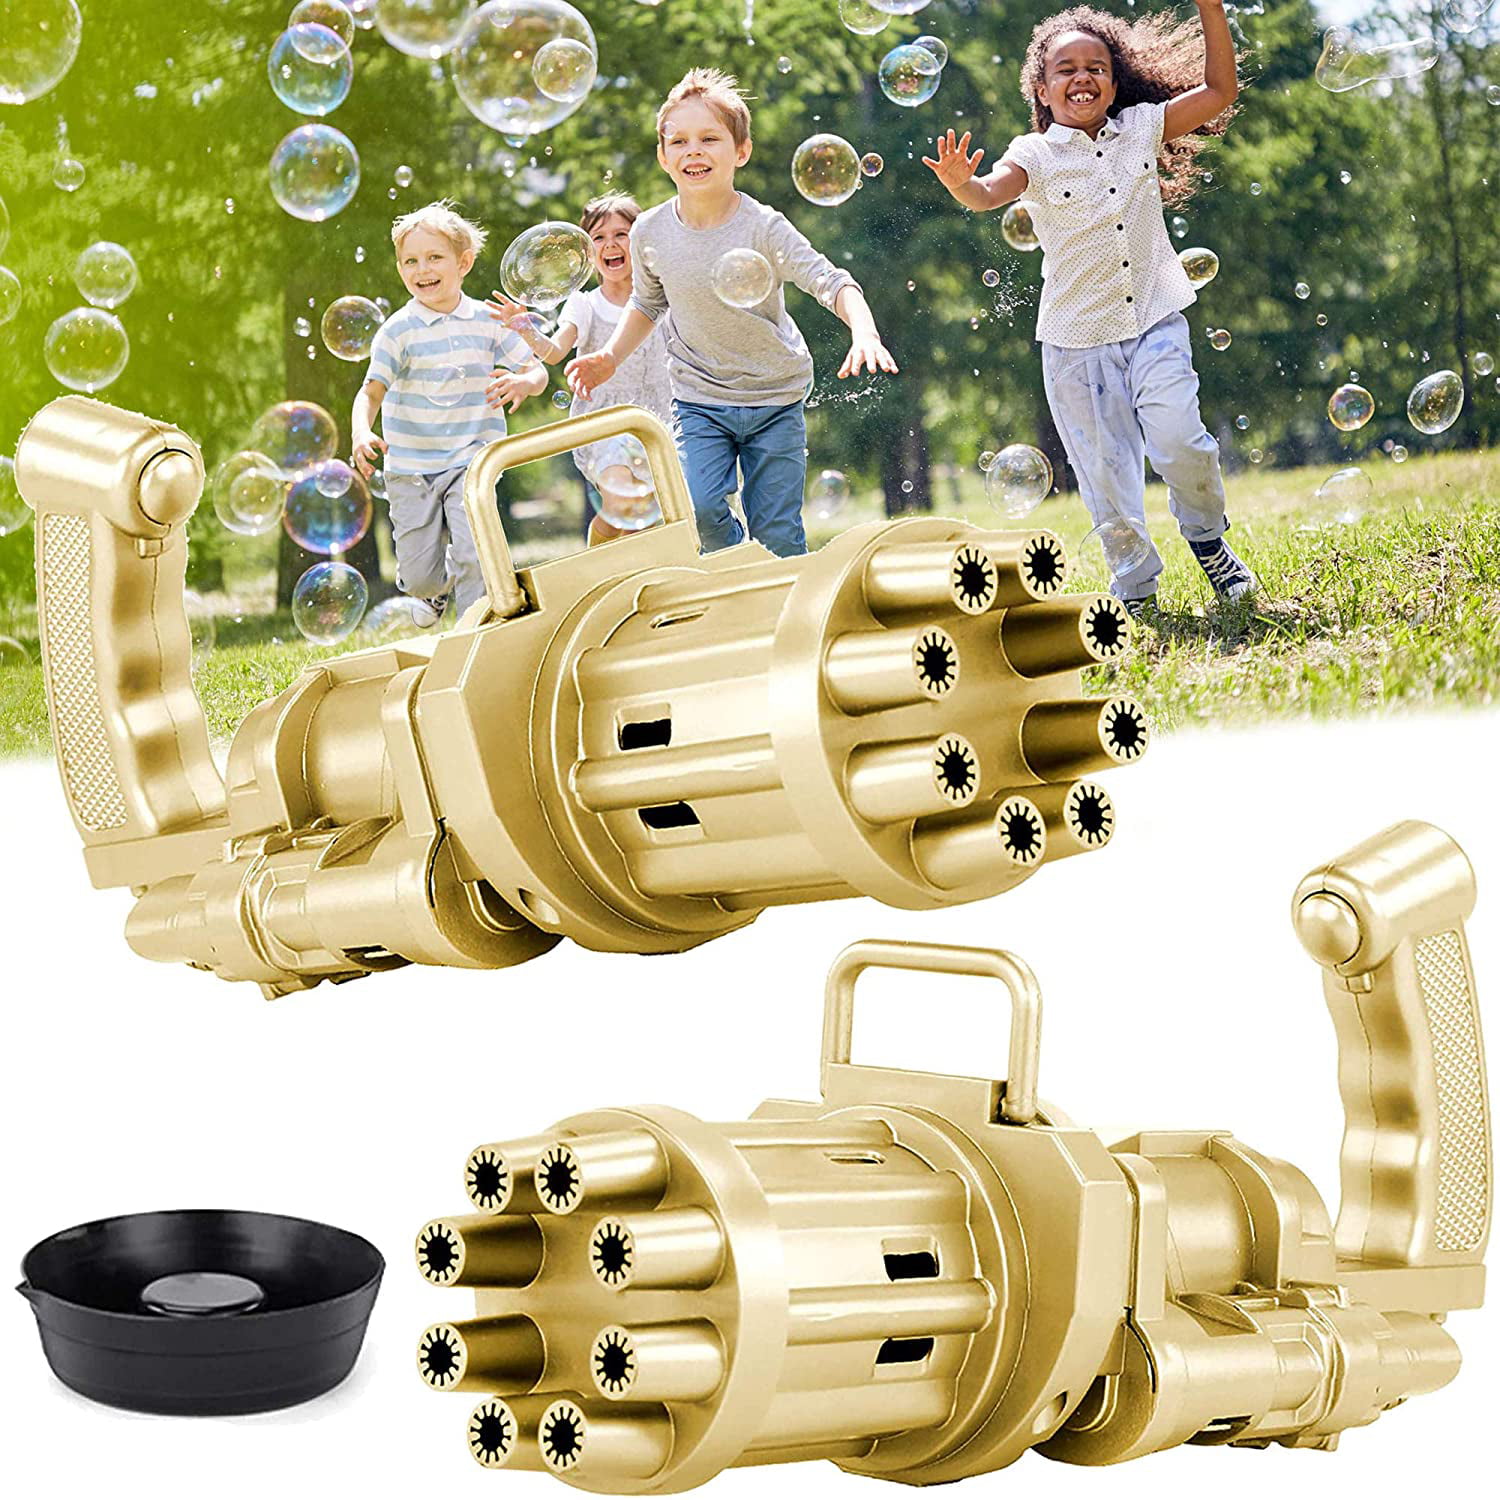 WUOOYOQ Gatling Bubble Guns,2021 Cool Toys Gift，Eight Hole Huge Amount Automatic Bubble Maker Kids Bubble Gun,Bubble Guns Automatic Bubble Machine,Outdoor Toys For Boys and Girls